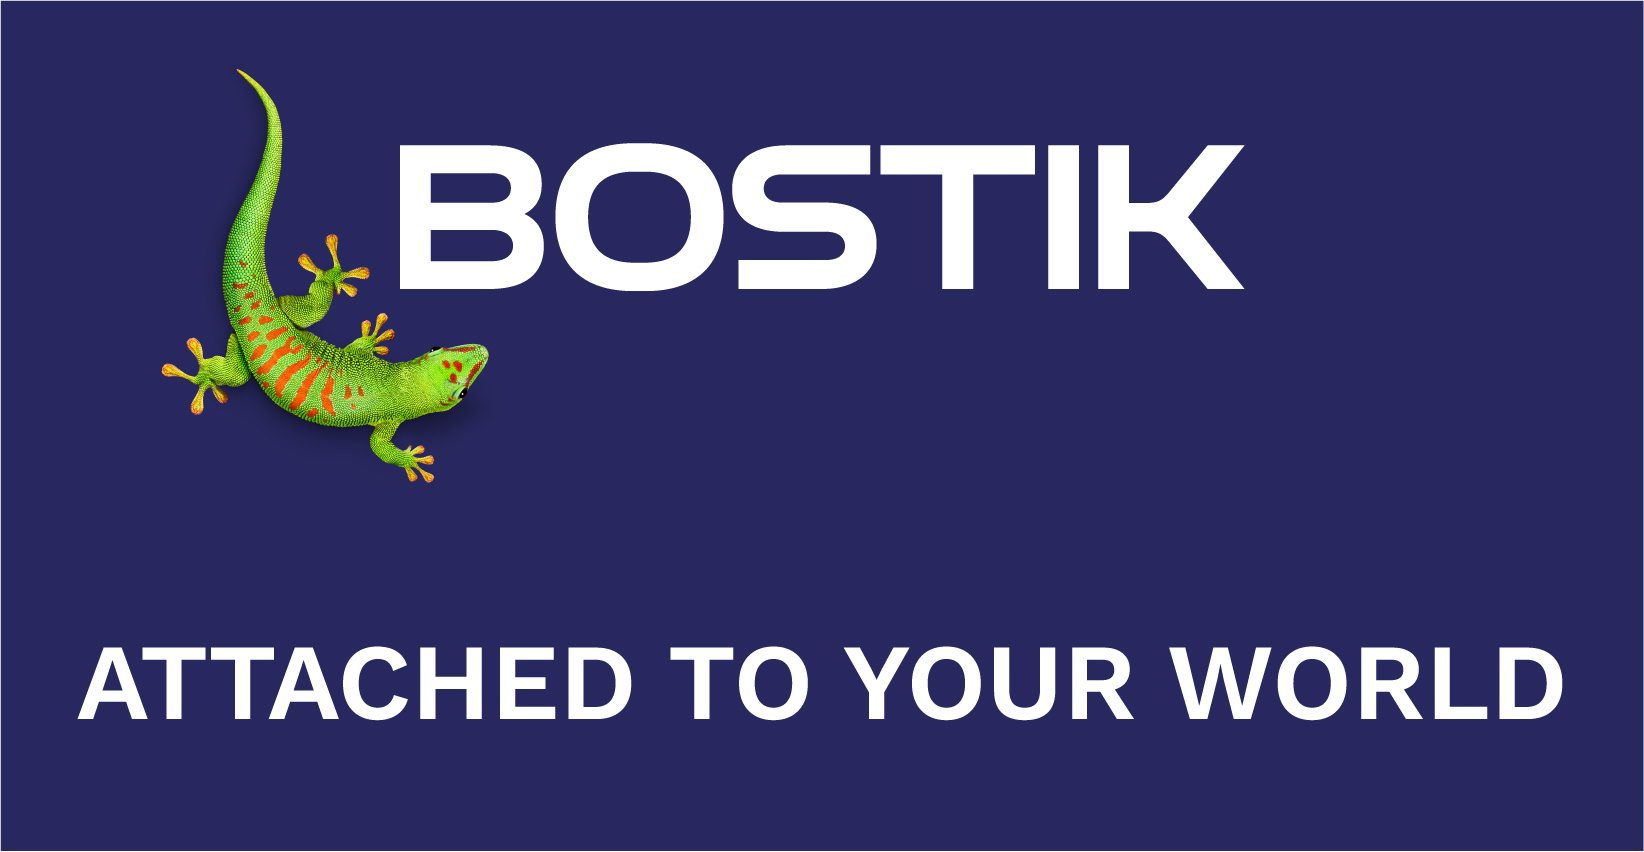  BOSTIK ATTACHED TO YOUR WORLD